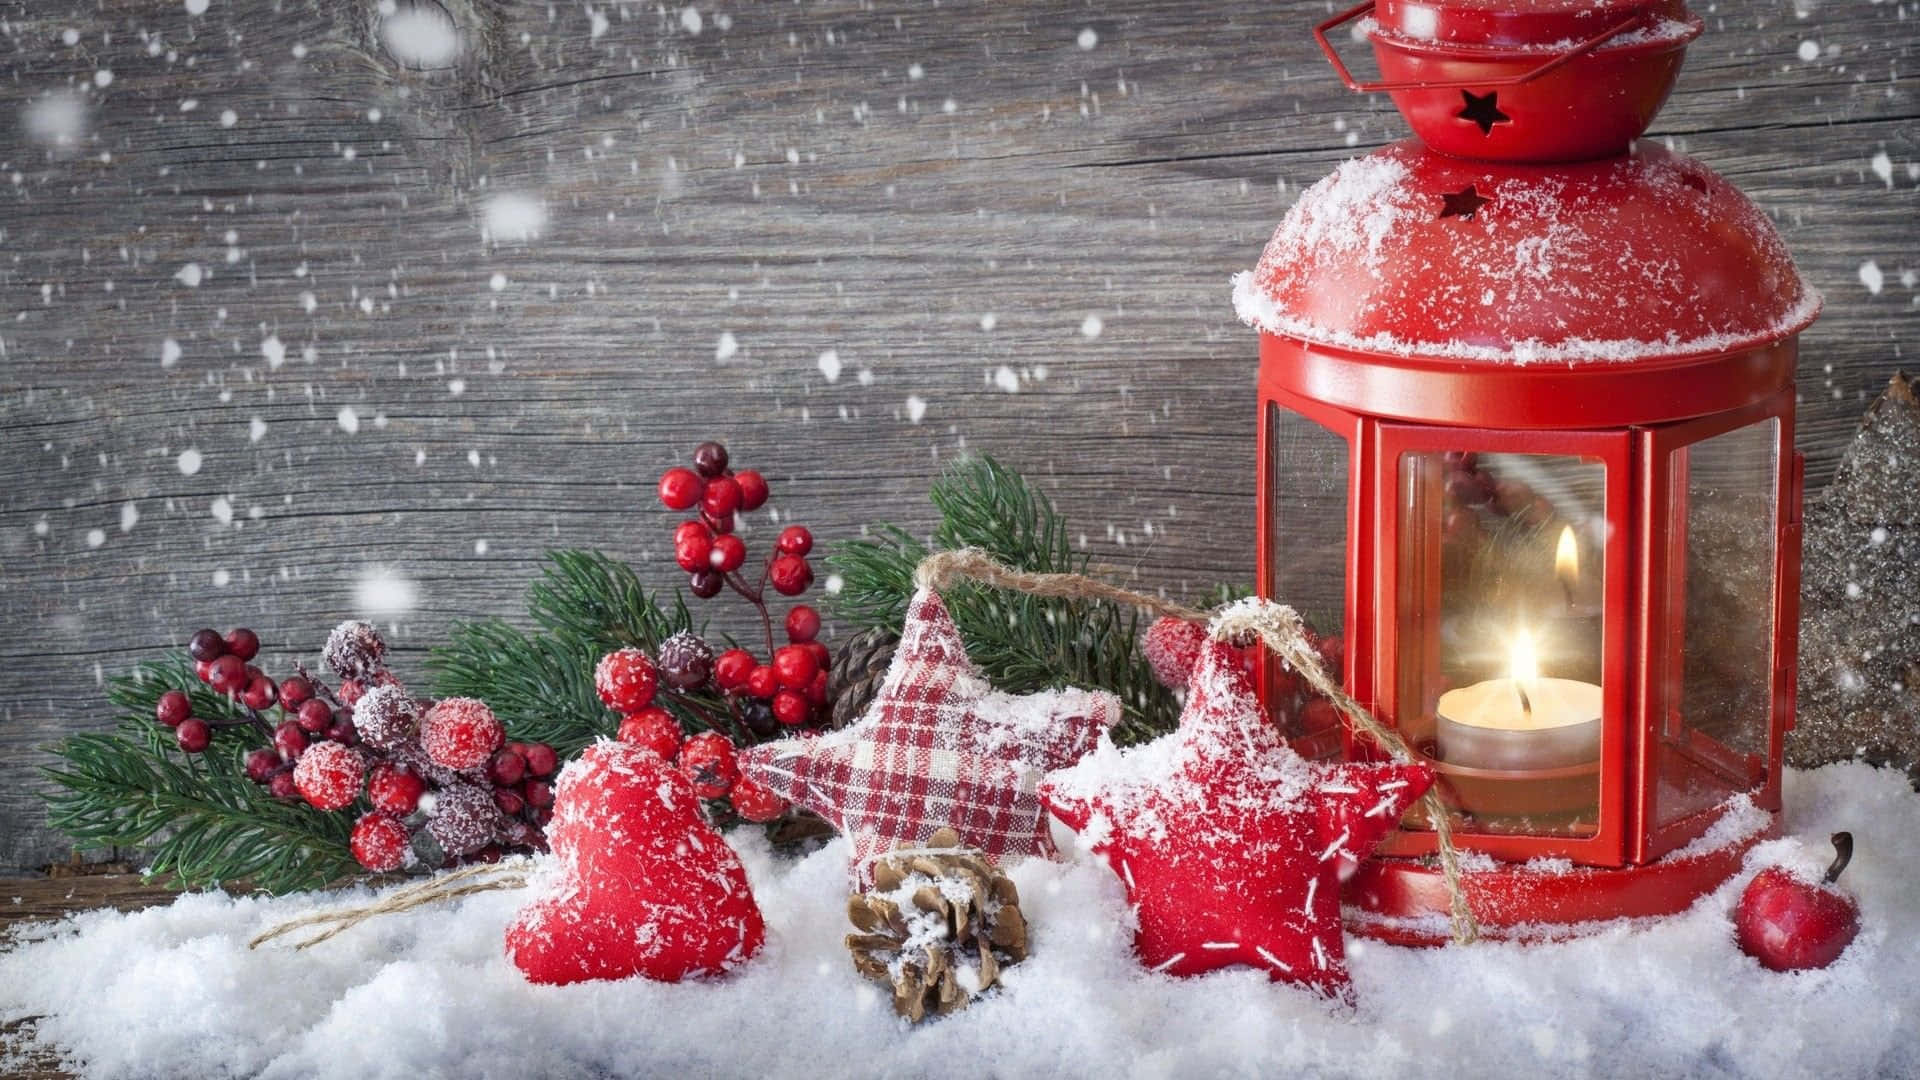 Red Lantern With Snow And Decorations On A Wooden Table Wallpaper